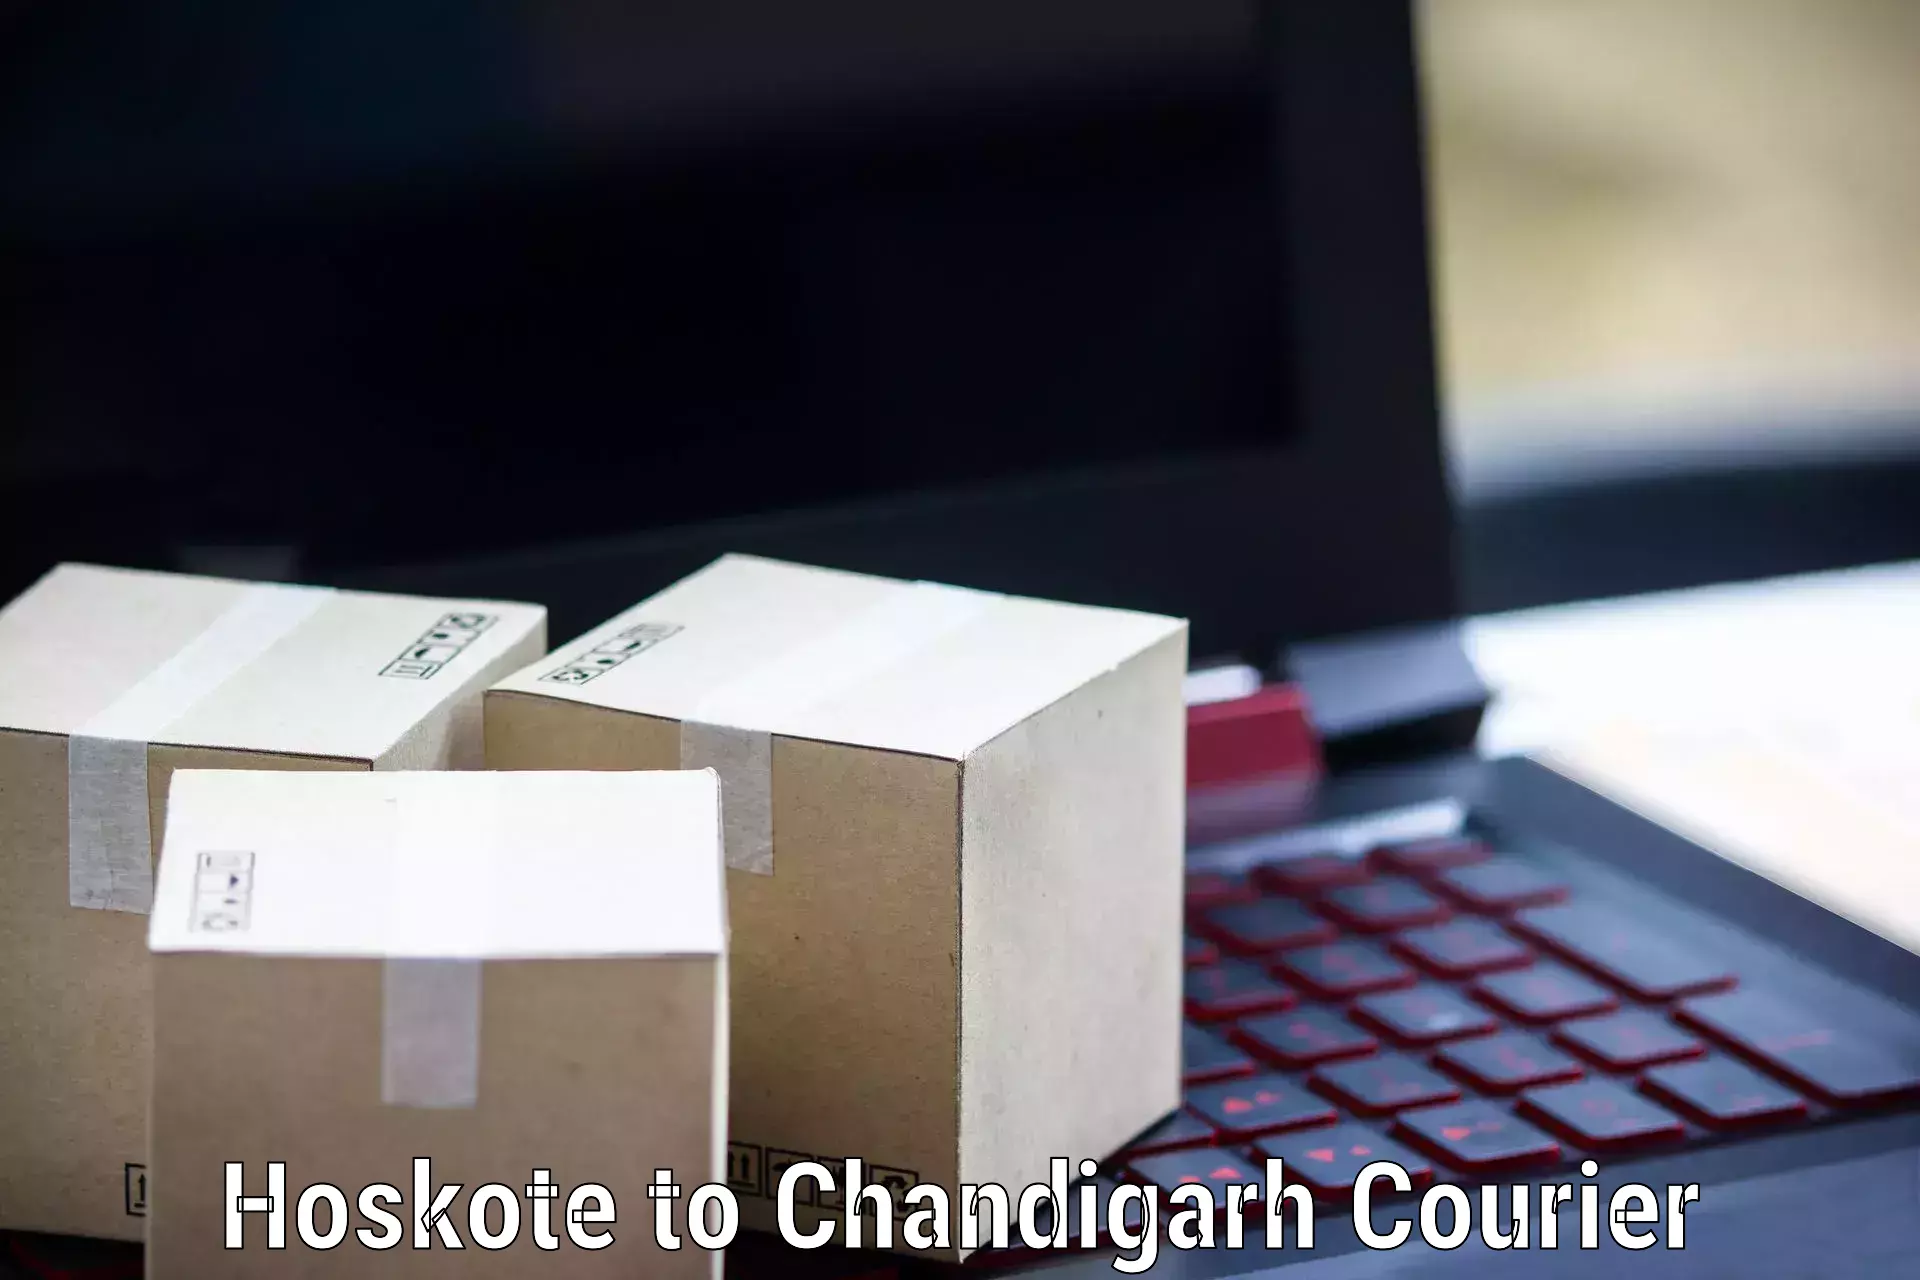 Easy access courier services Hoskote to Chandigarh